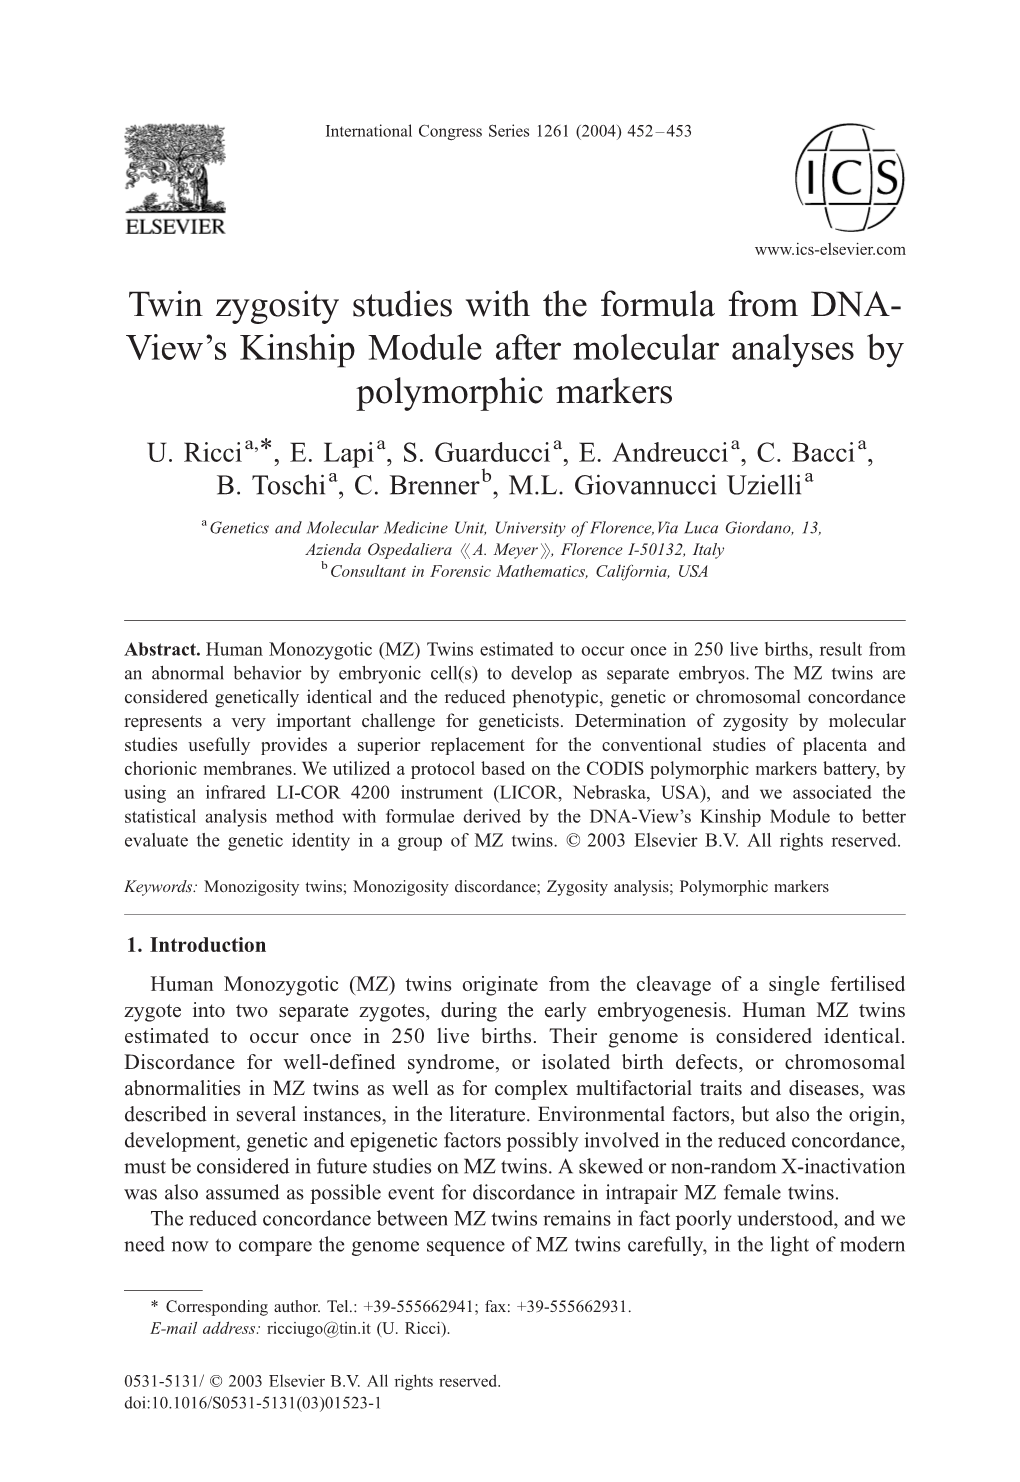 Twin Zygosity Studies with the Formula from DNA- View's Kinship Module